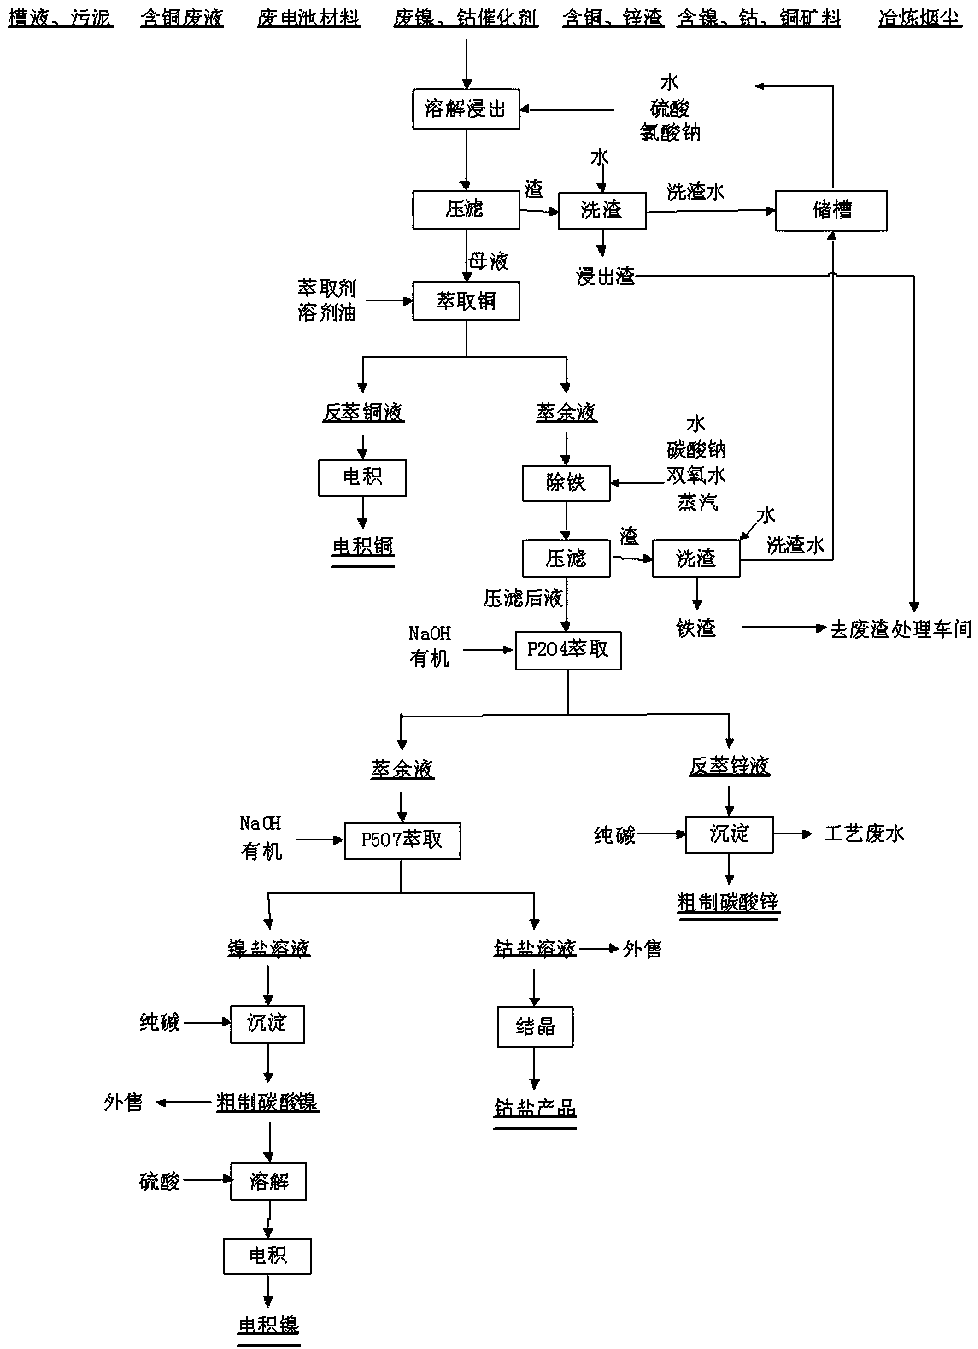 Method for recovering copper, zinc, cobalt and nickel from various waste materials containing ferrous metals